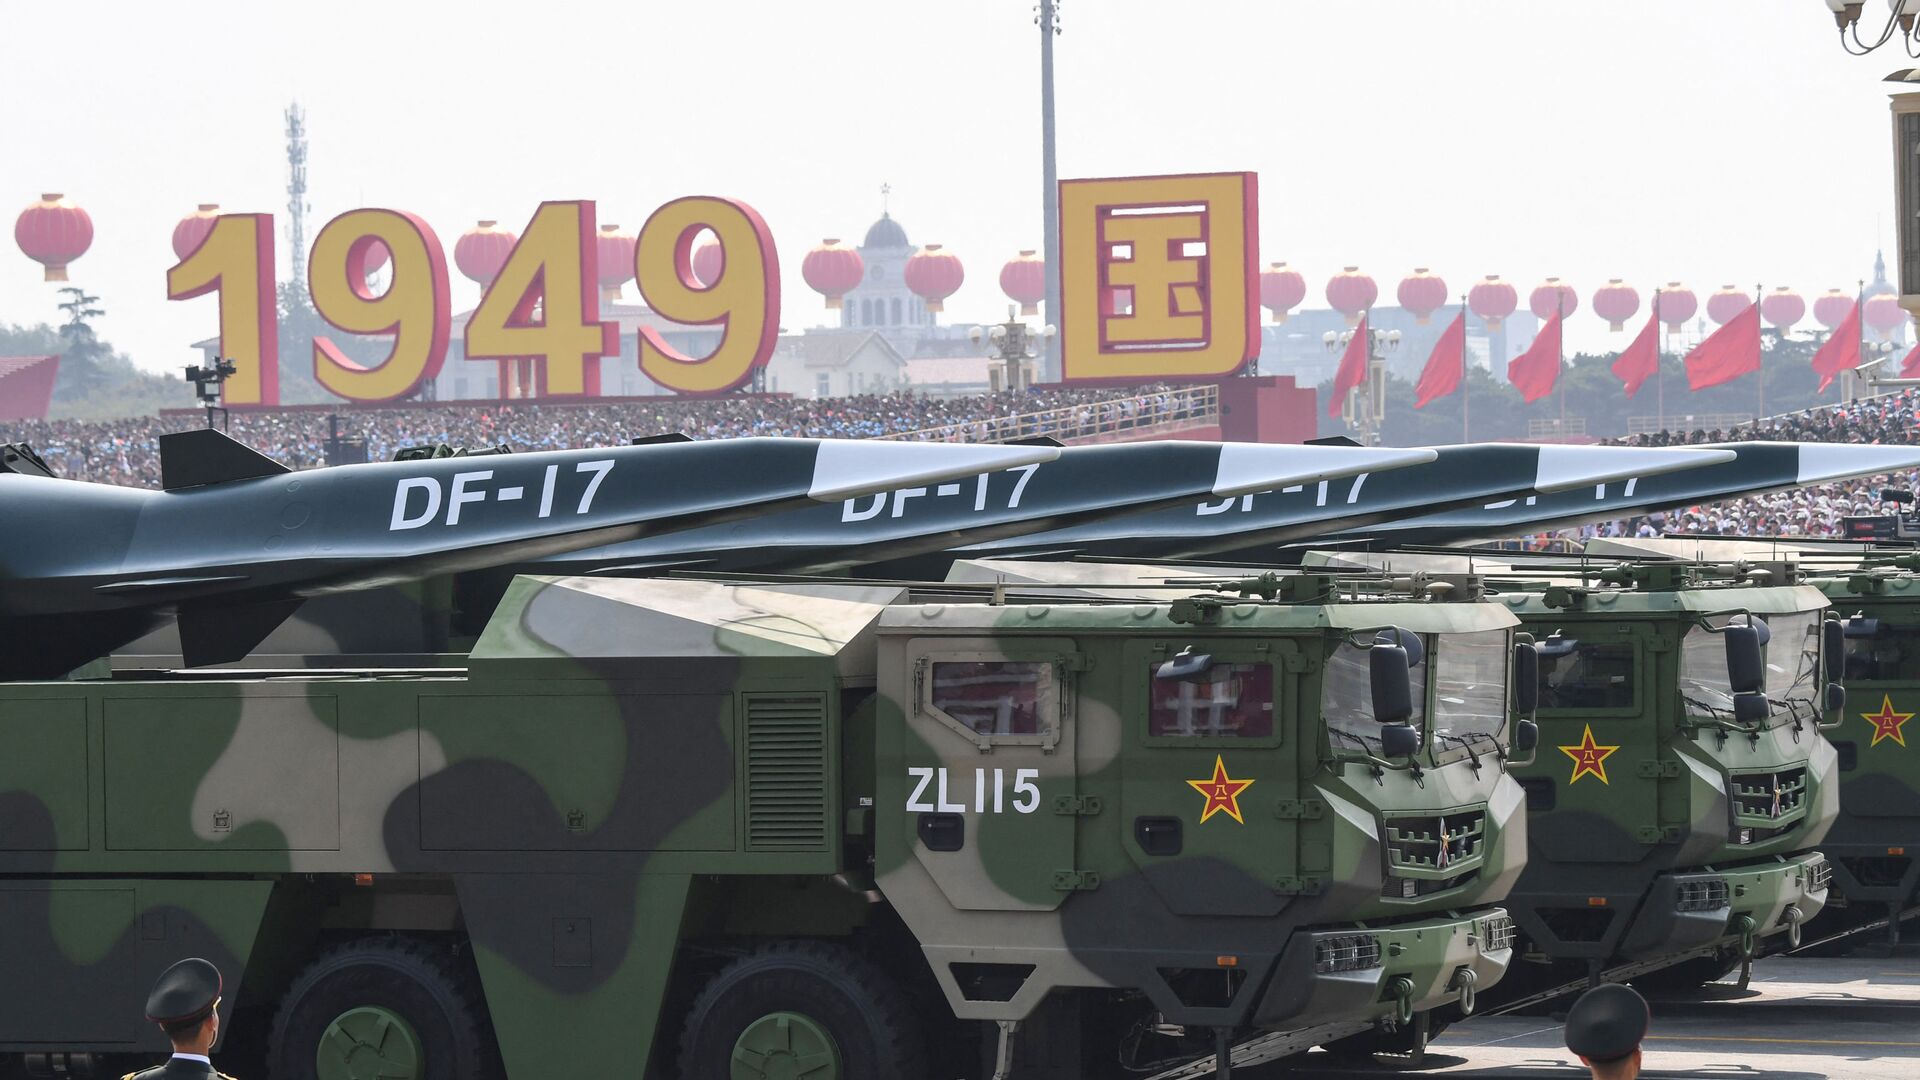 Military vehicles carrying DF-17 missiles participate in a military parade at Tiananmen Square in Beijing on 1 October 2019, to mark the 70th anniversary of the founding of the People’s Republic of China. - Sputnik International, 1920, 03.09.2021